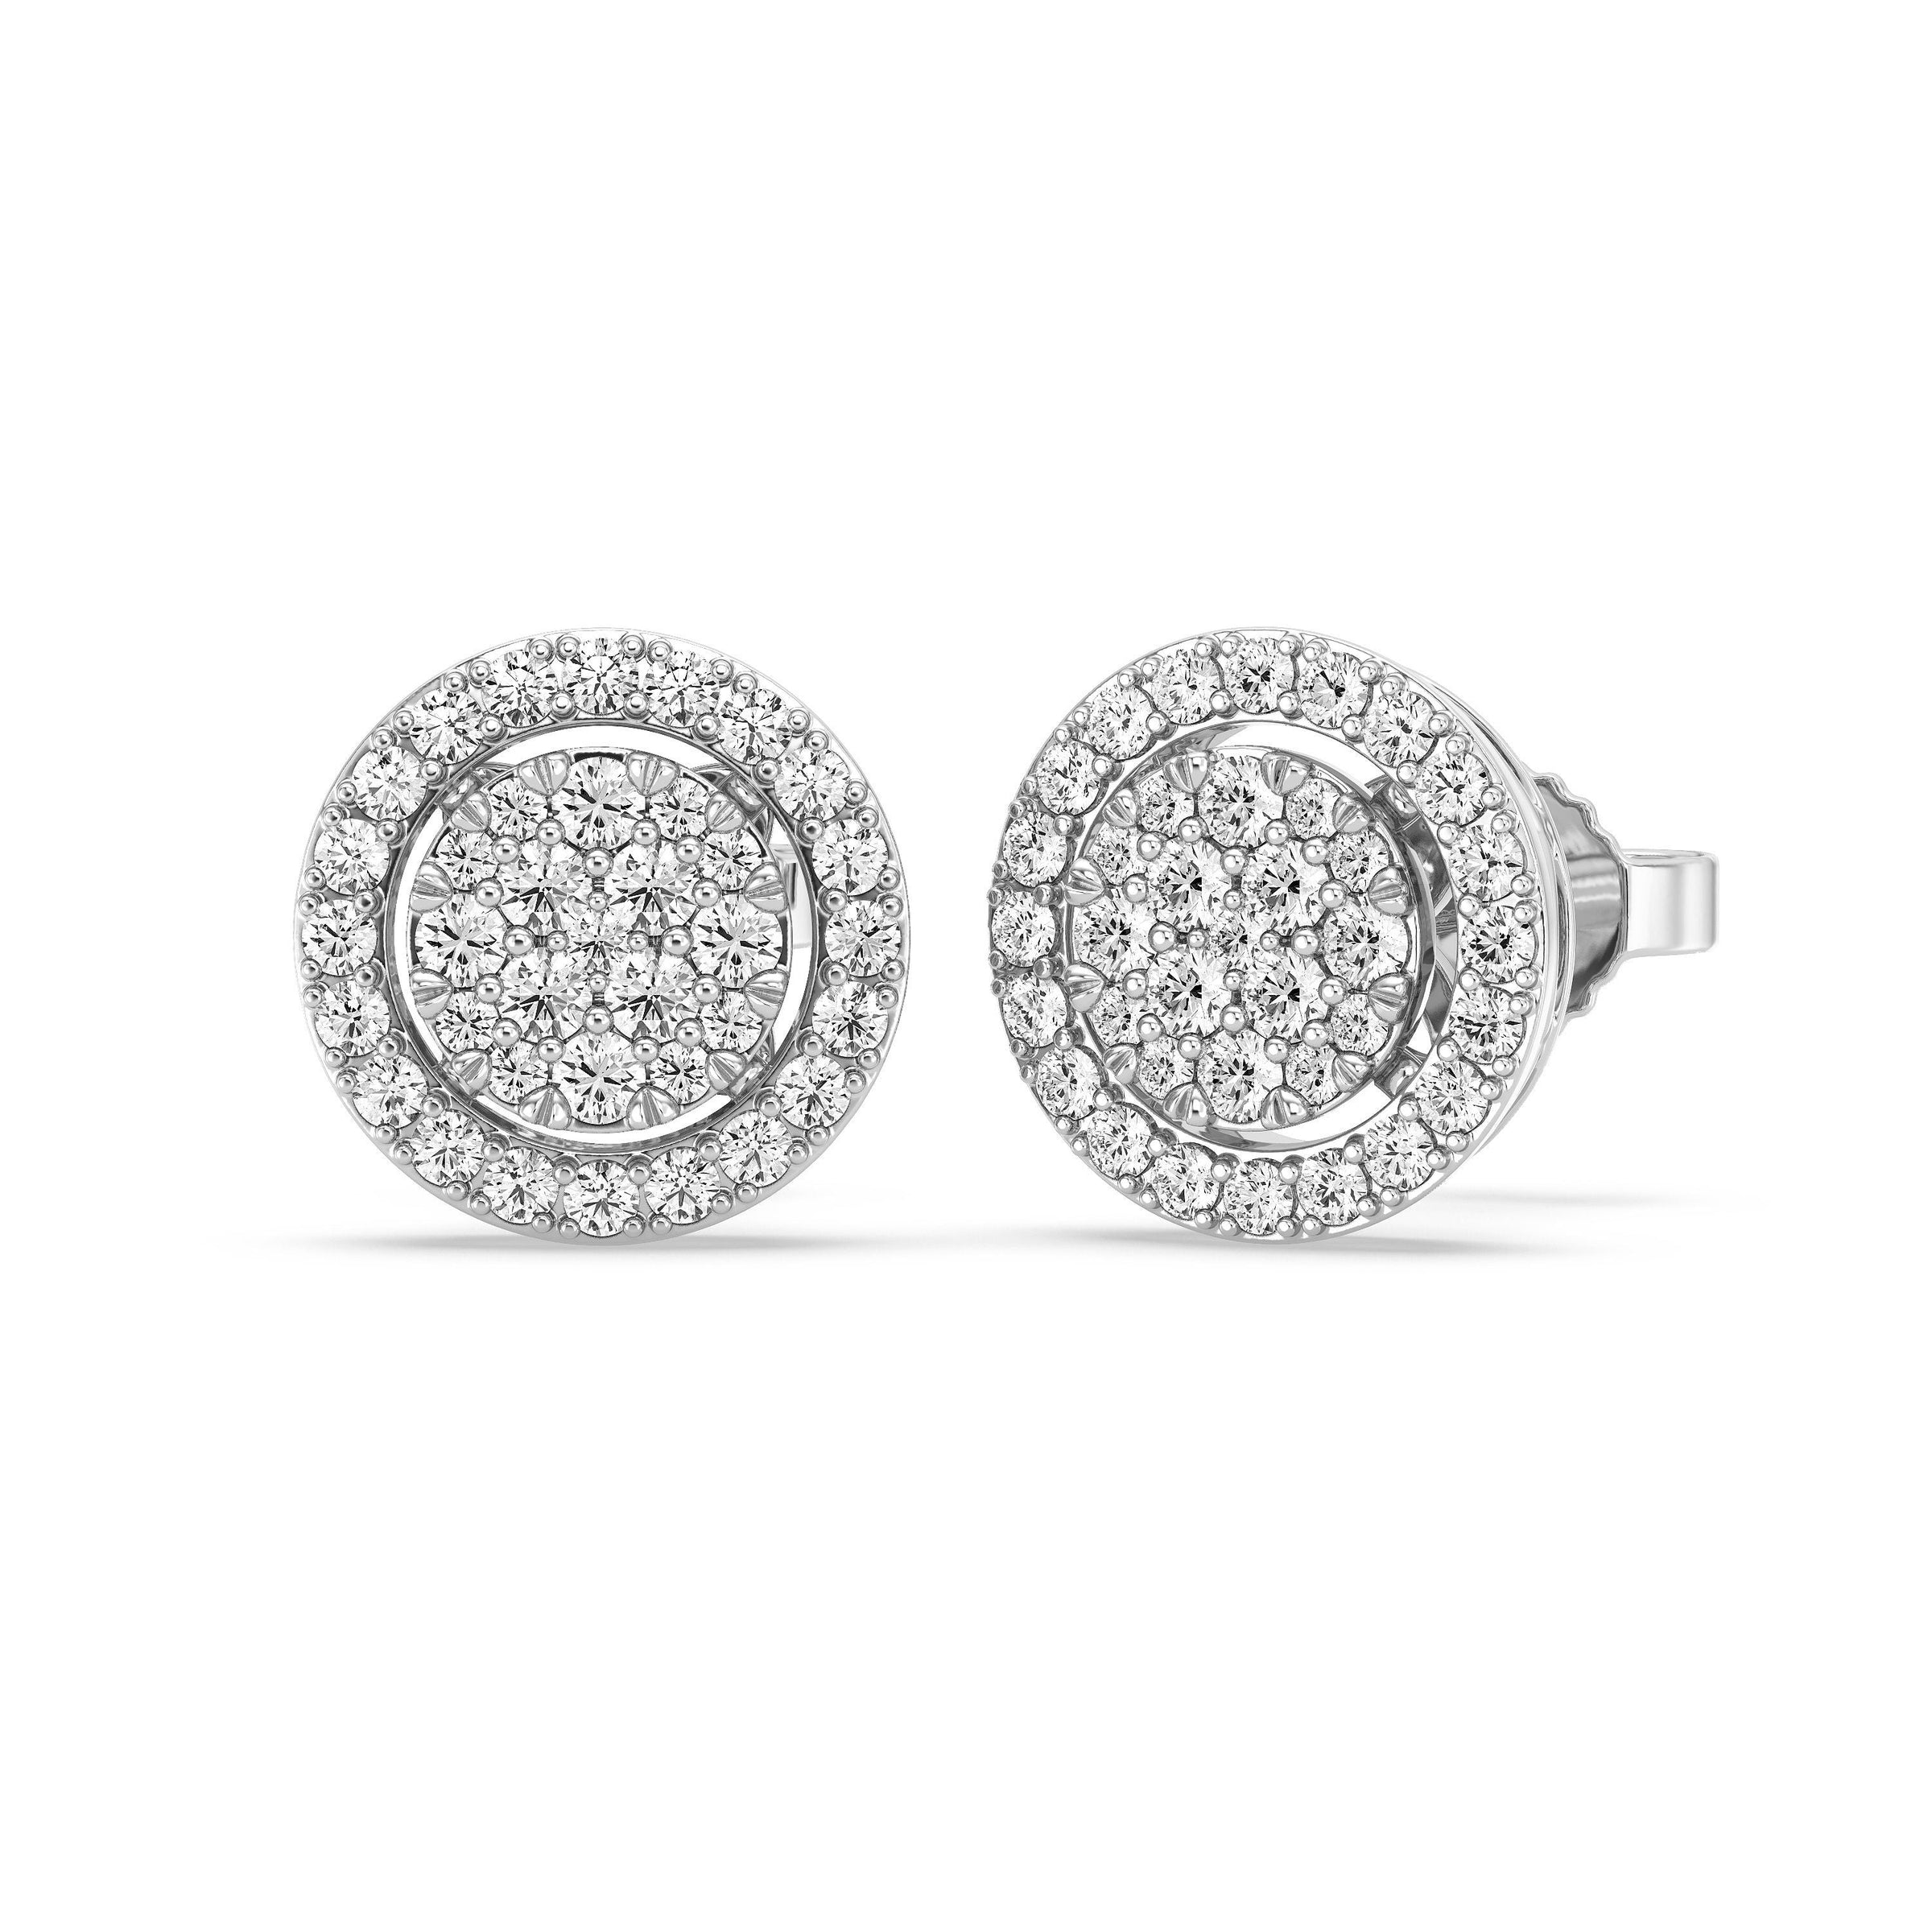 Mirage Halo Stud Earrings with 1/2ct of Laboratory Grown Diamonds in Sterling Silver and Platinum Earrings Bevilles 